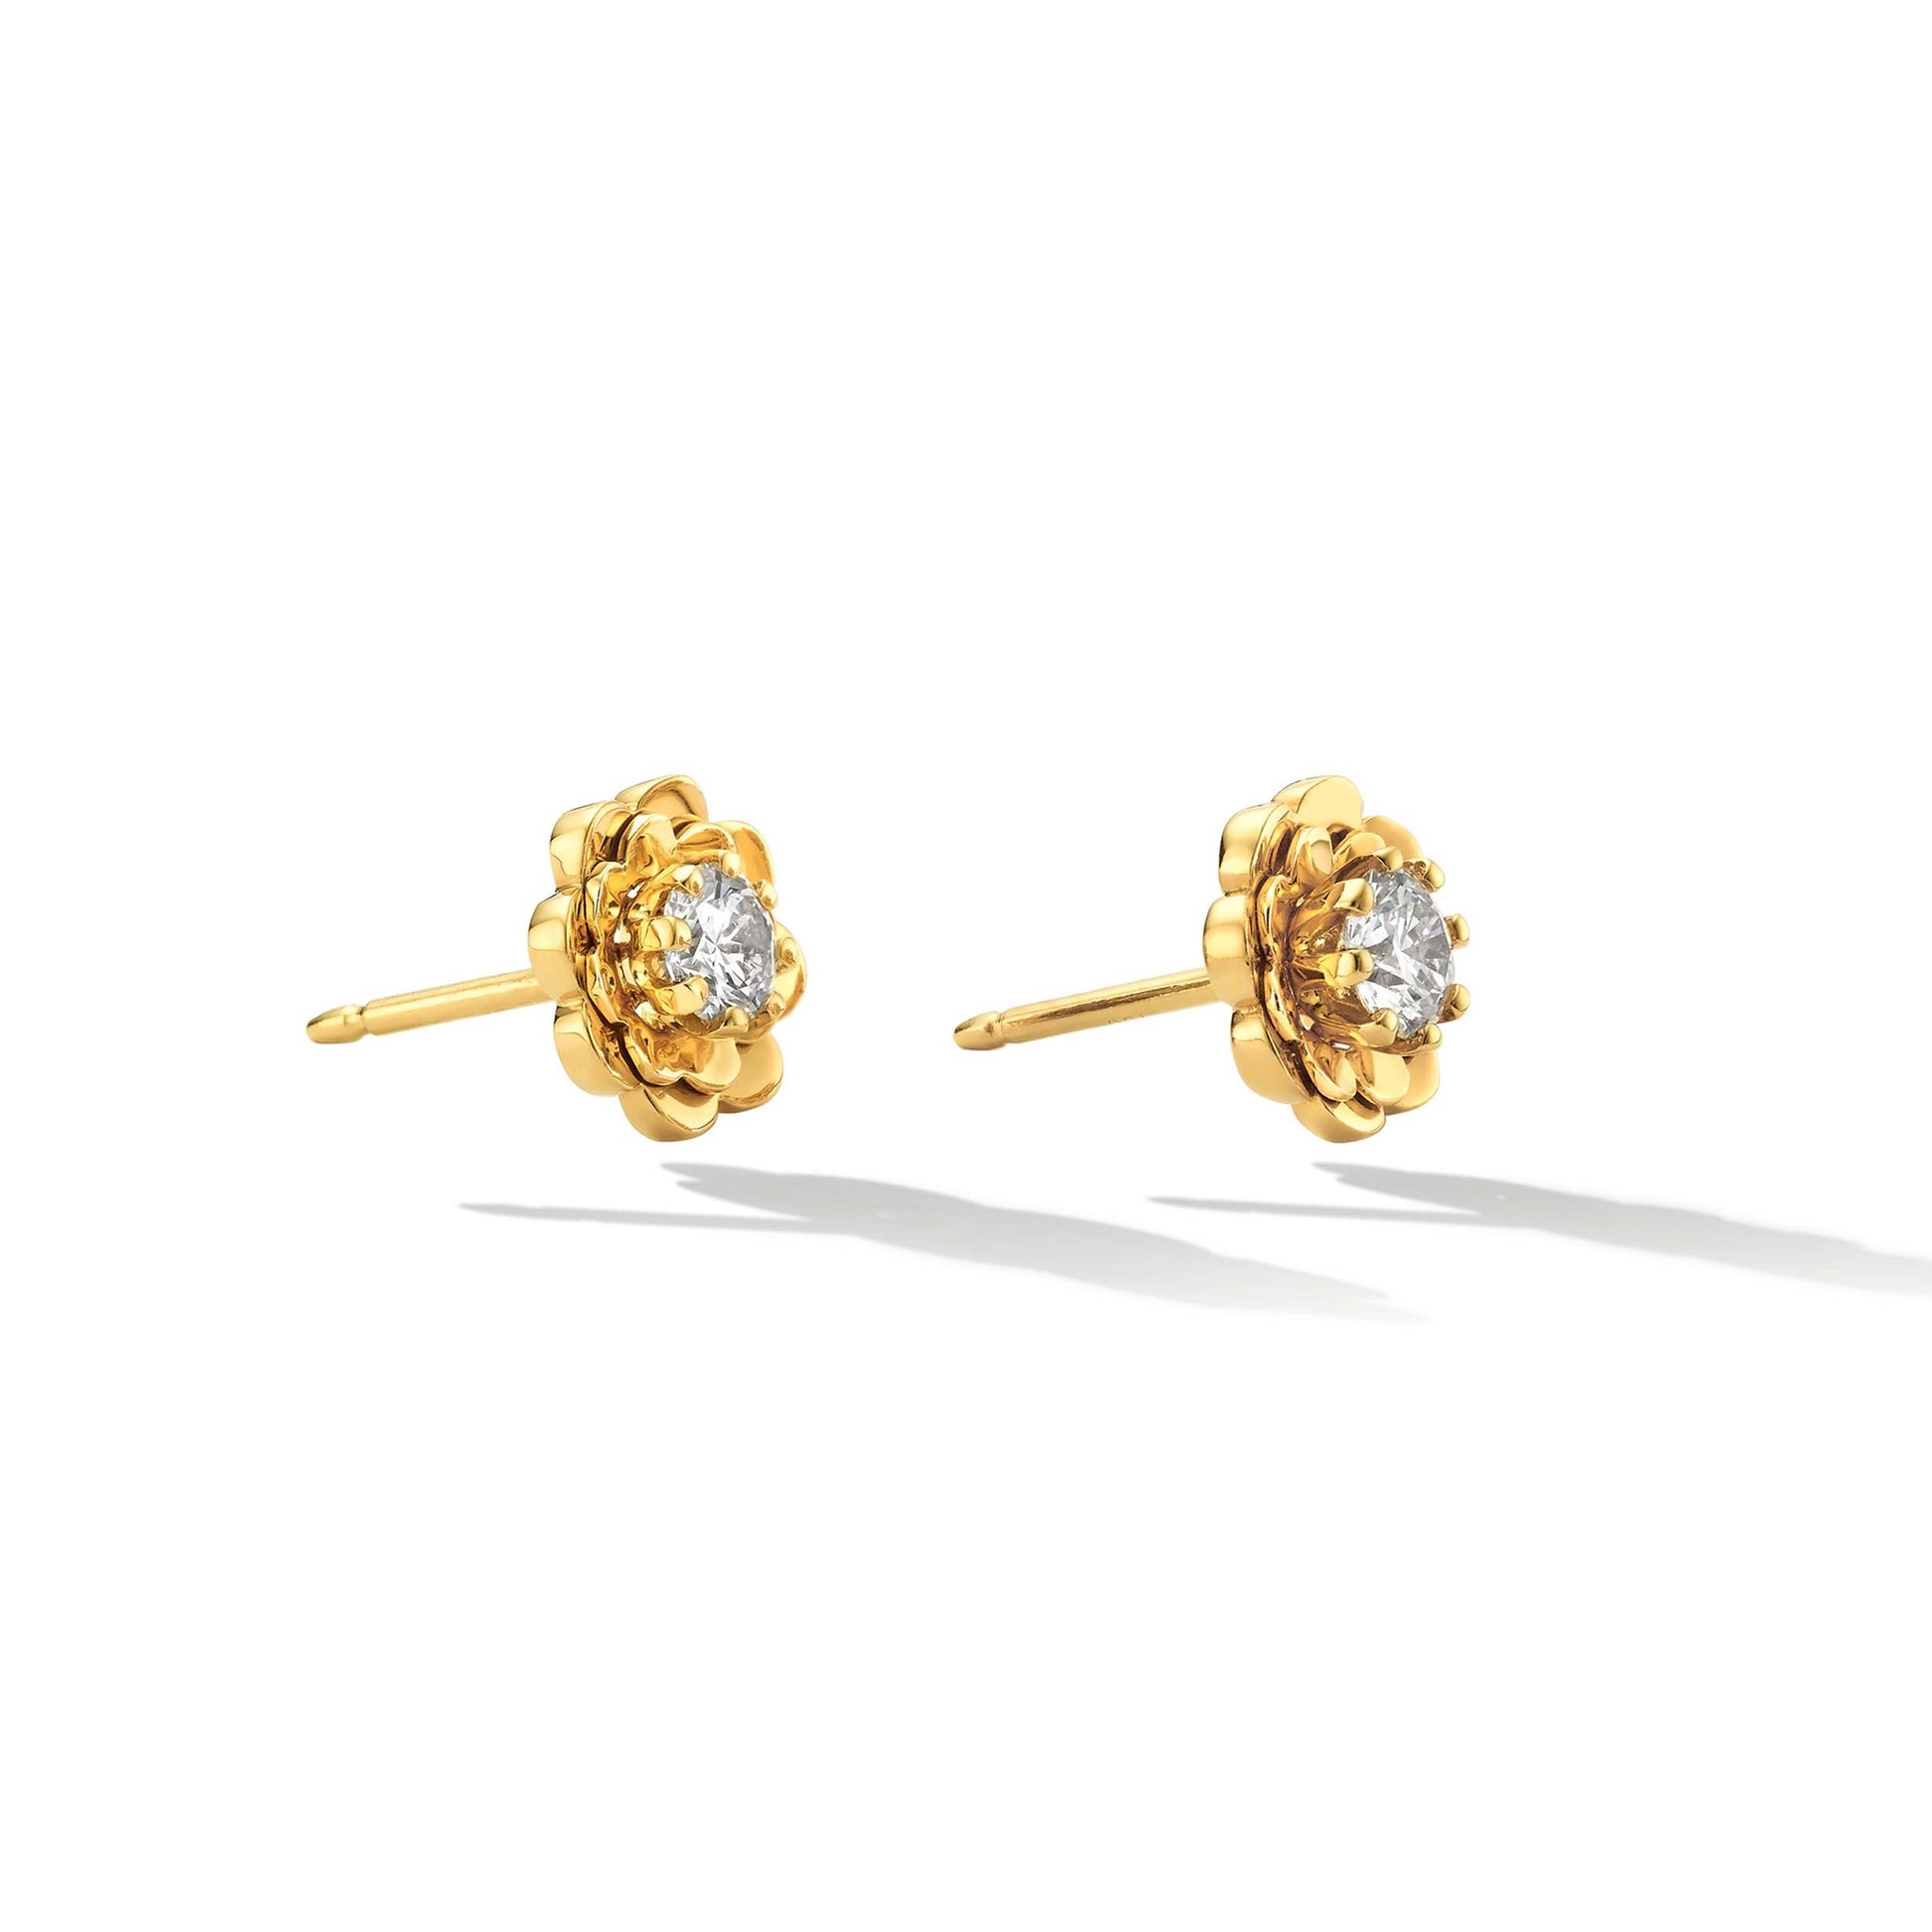 18K Gold Trio Stud Earrings with White Diamonds .47 Carats | Cadar